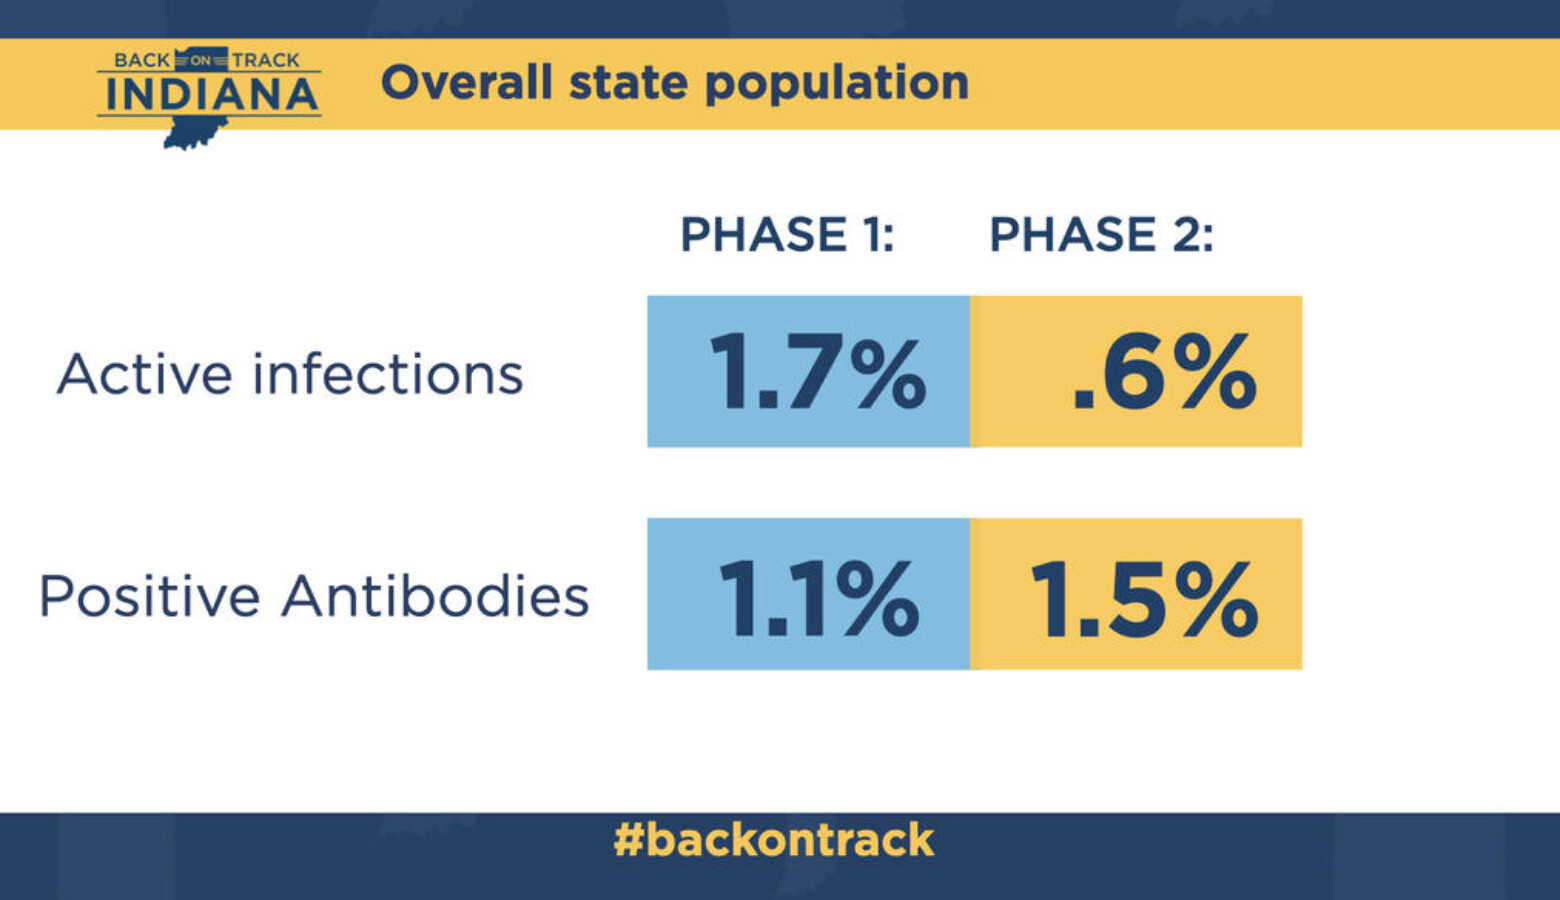 The spread of COVID-19 seems to be slowing down in Indiana according to the latest results in a statewide study of the virus. (Courtesy of the governor's office)